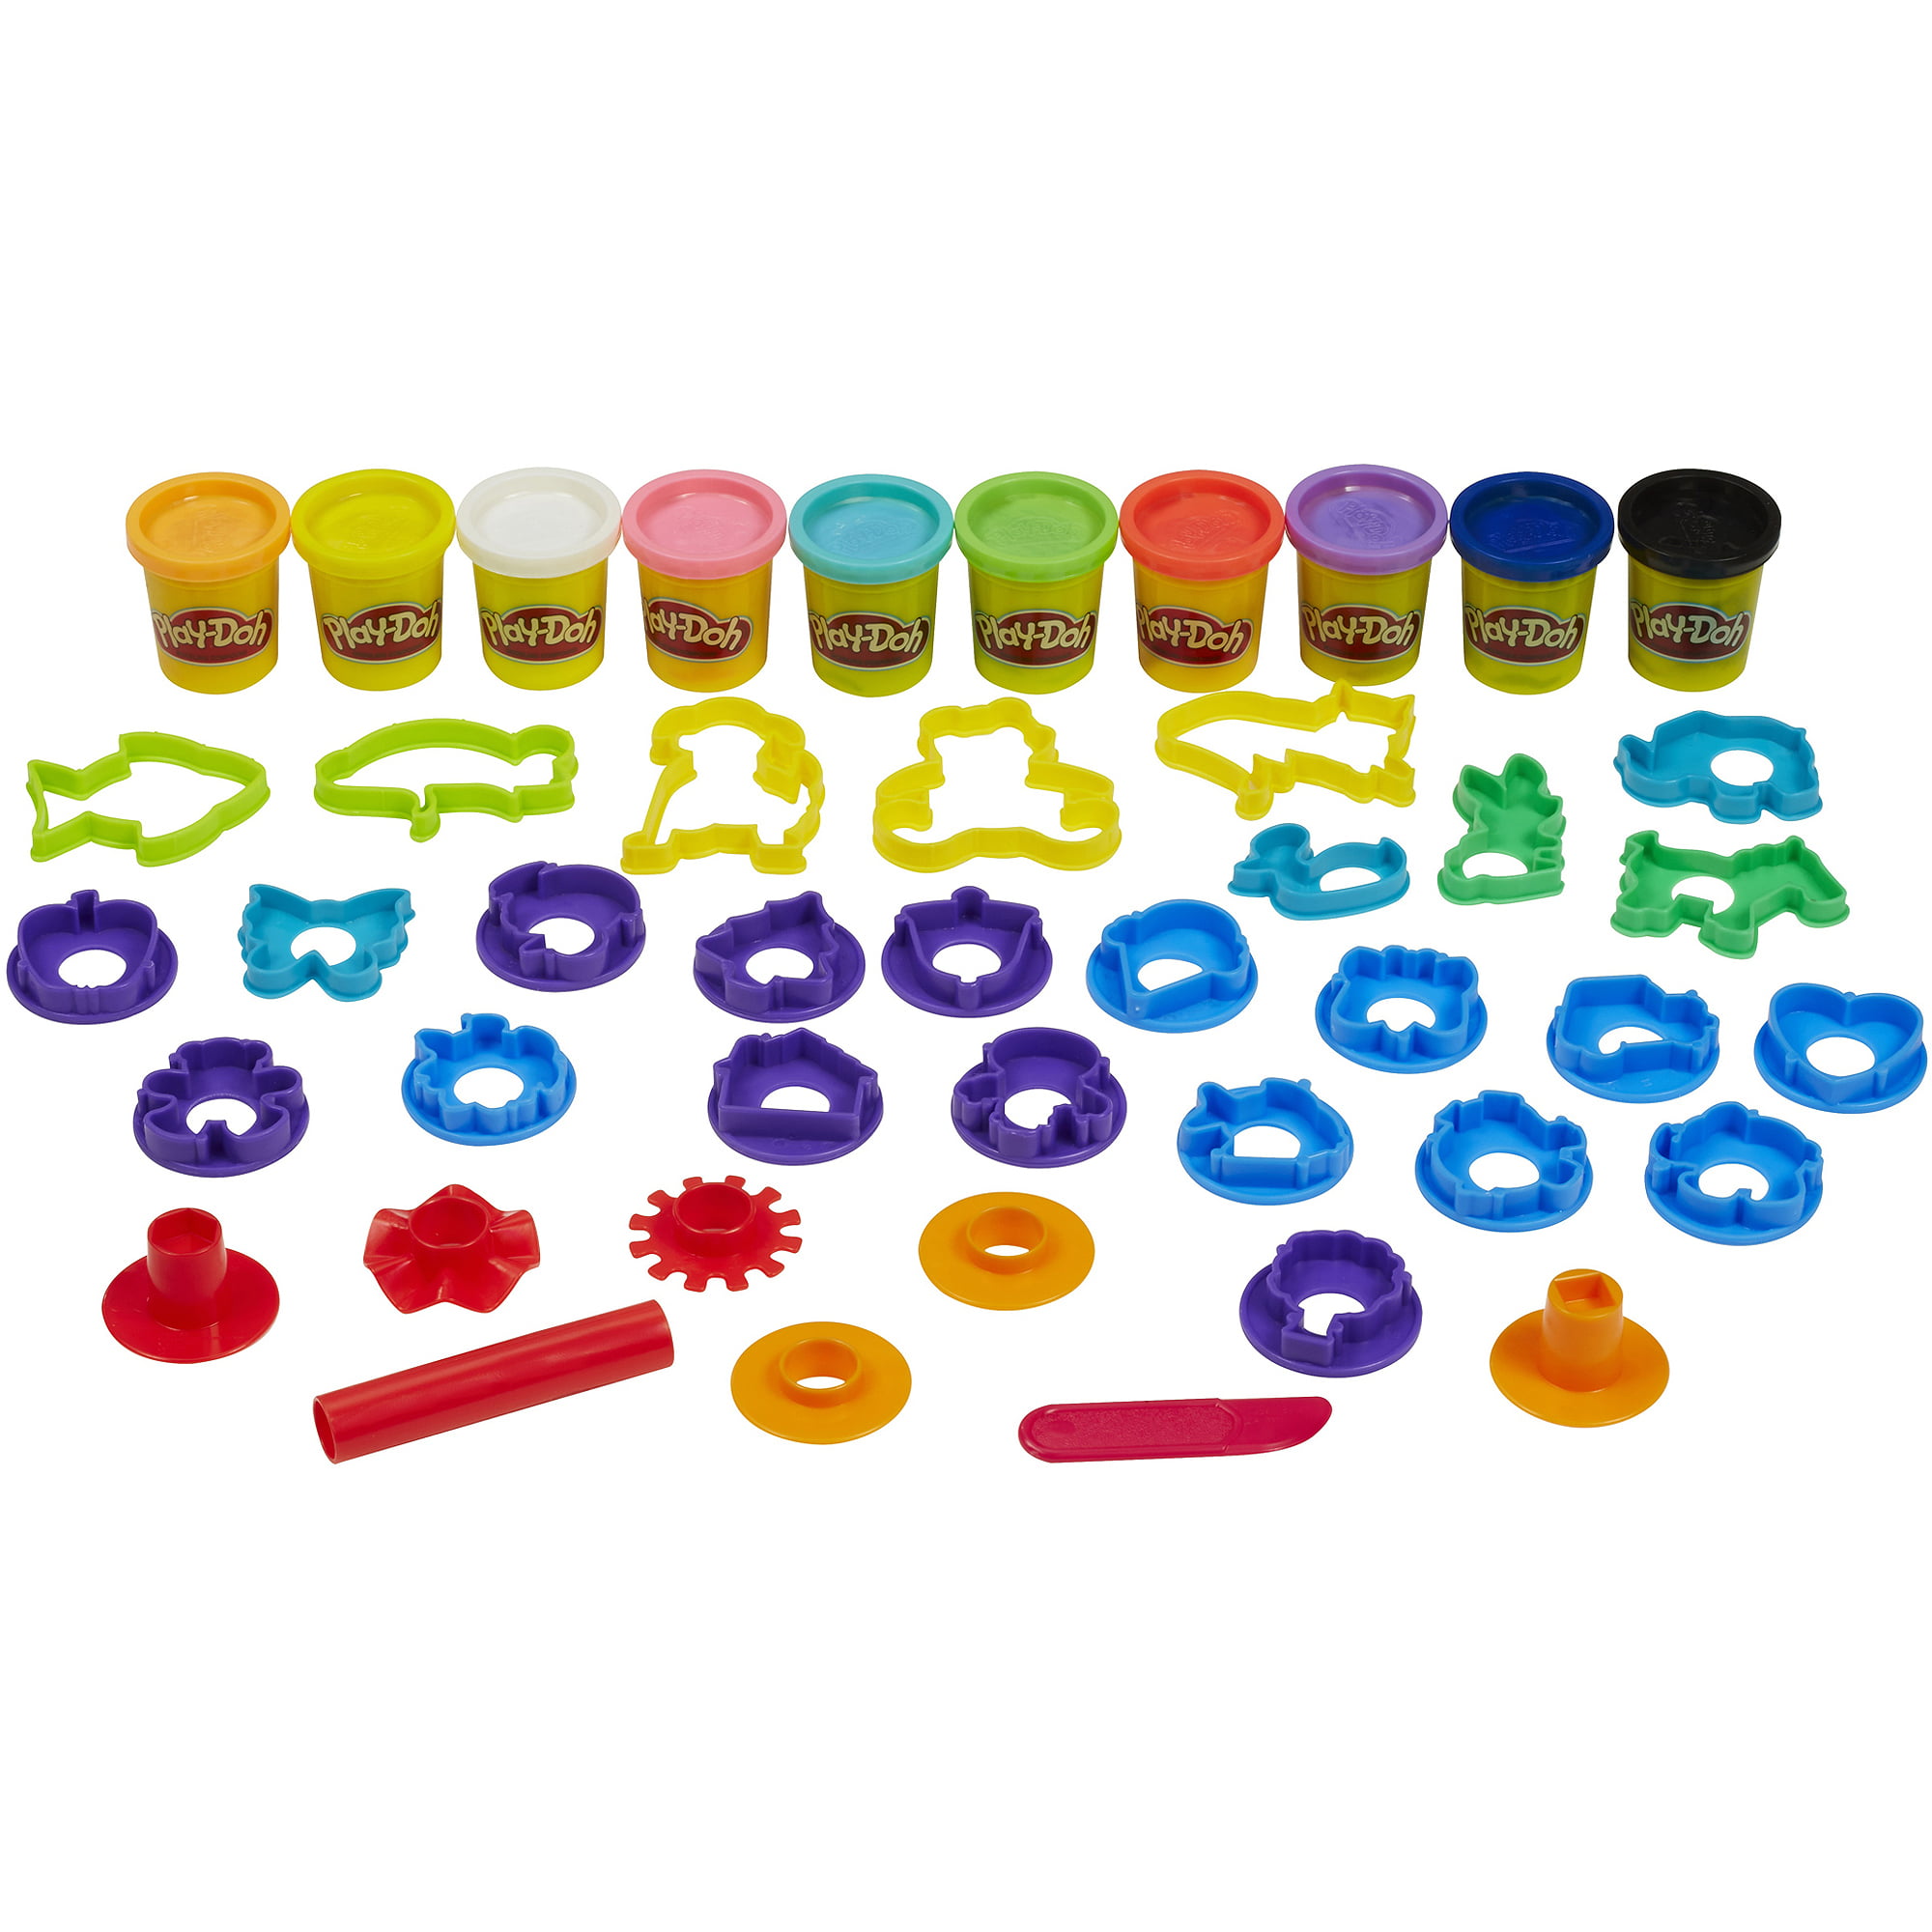 Hasbro Play-doh Fun Numbers & Shapes Set 10 Stampers 3 Mold Plates 6 Colors for sale online 